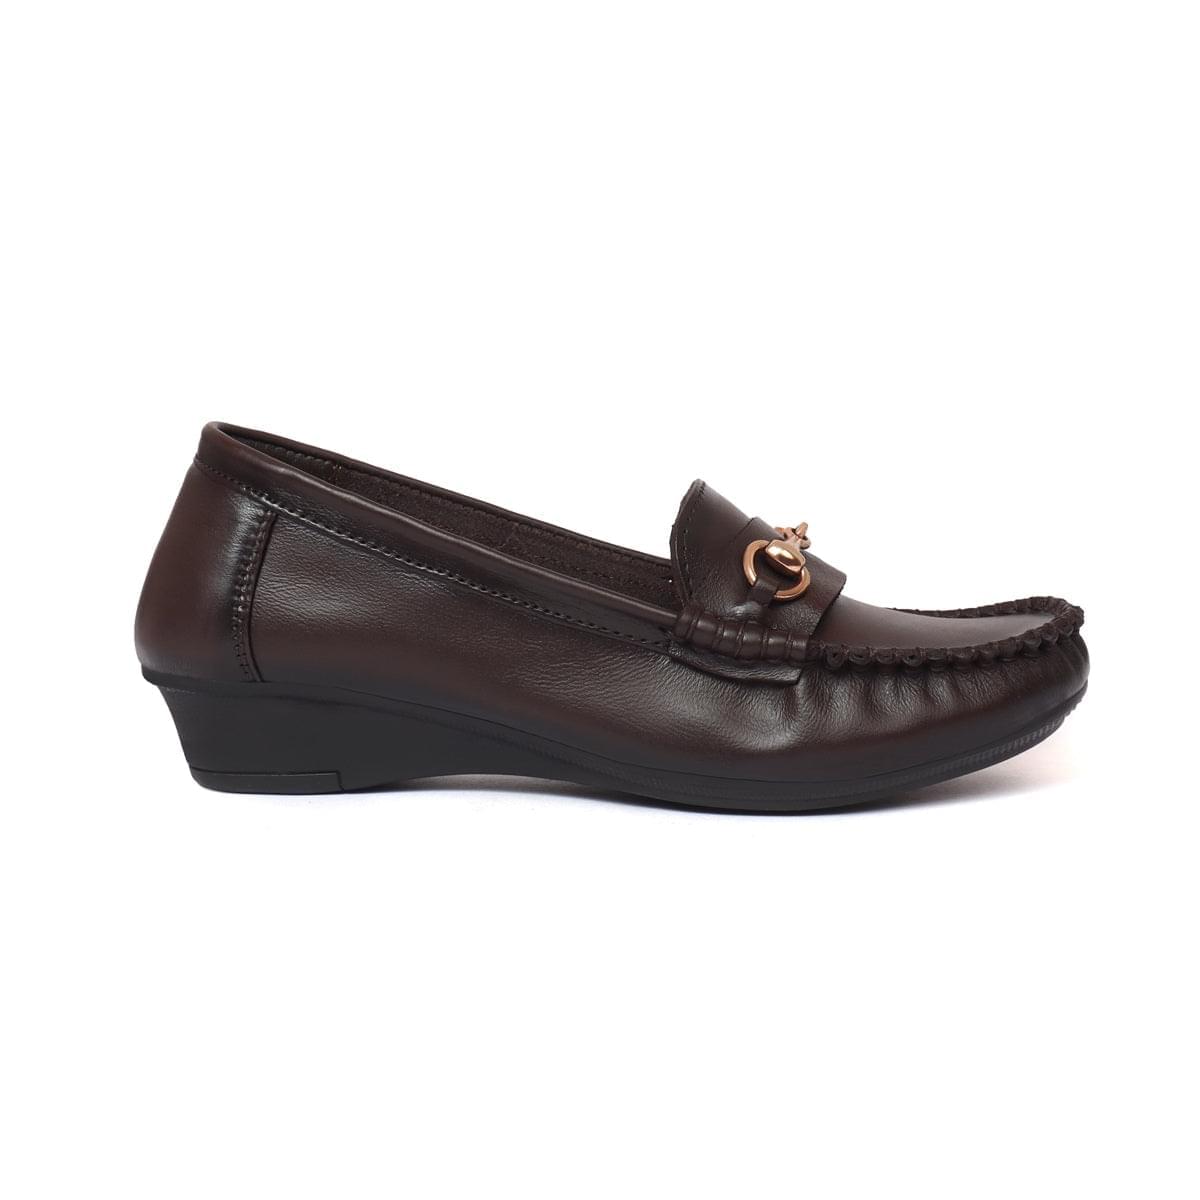 loafer formal shoes for women brown1